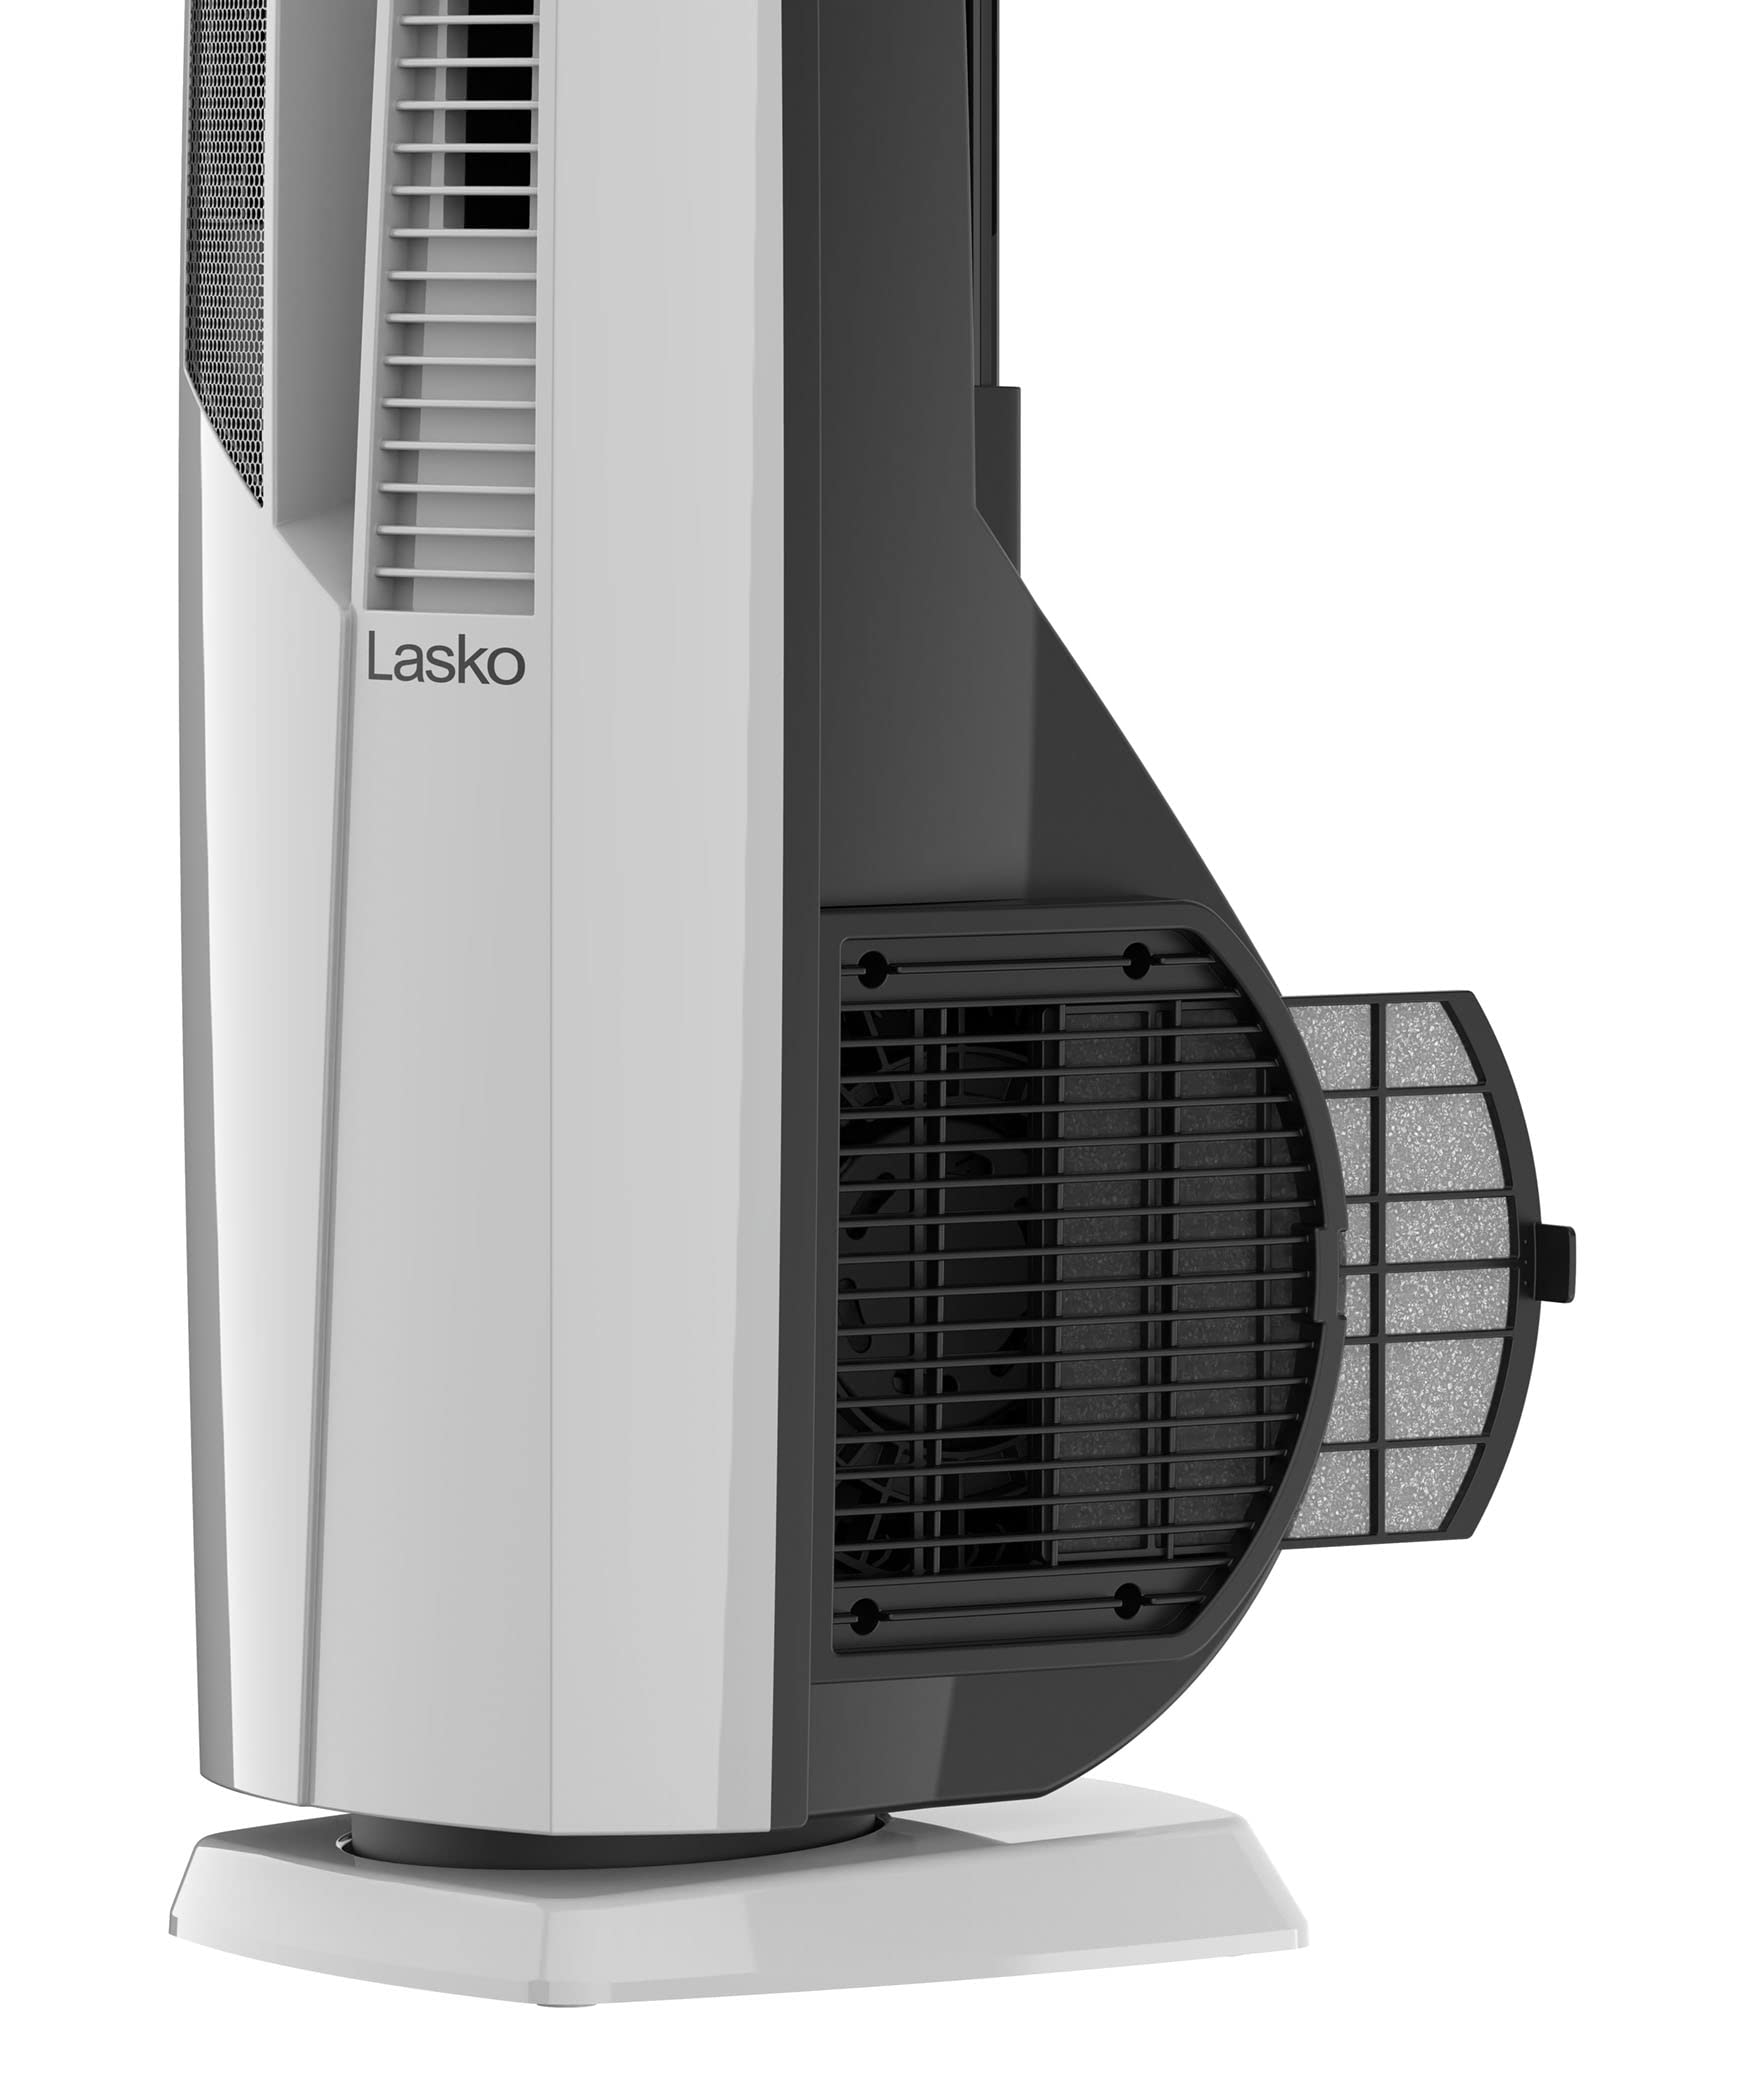 Lasko Oscillating Hybrid Fan and Space Heater for Home, All Season High Velocity Hybrid with Tip-Over Switch, Remote Control, Timer and Thermostat, 37.5 Inches, White, 1500W, FHV820